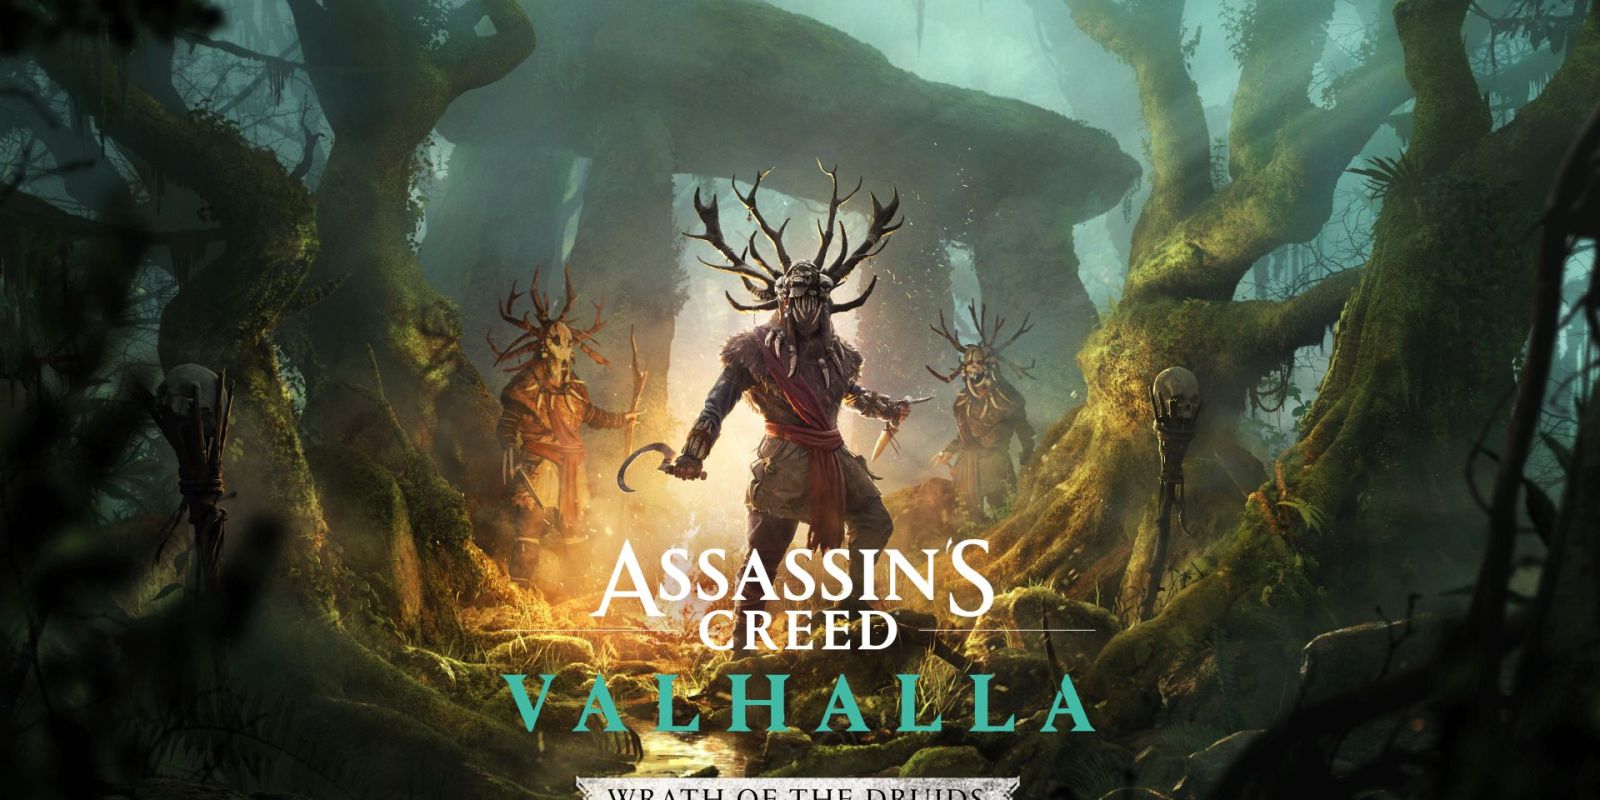 Ubisoft DLC Wrath of the Druids review Assassin's Creed Valhalla